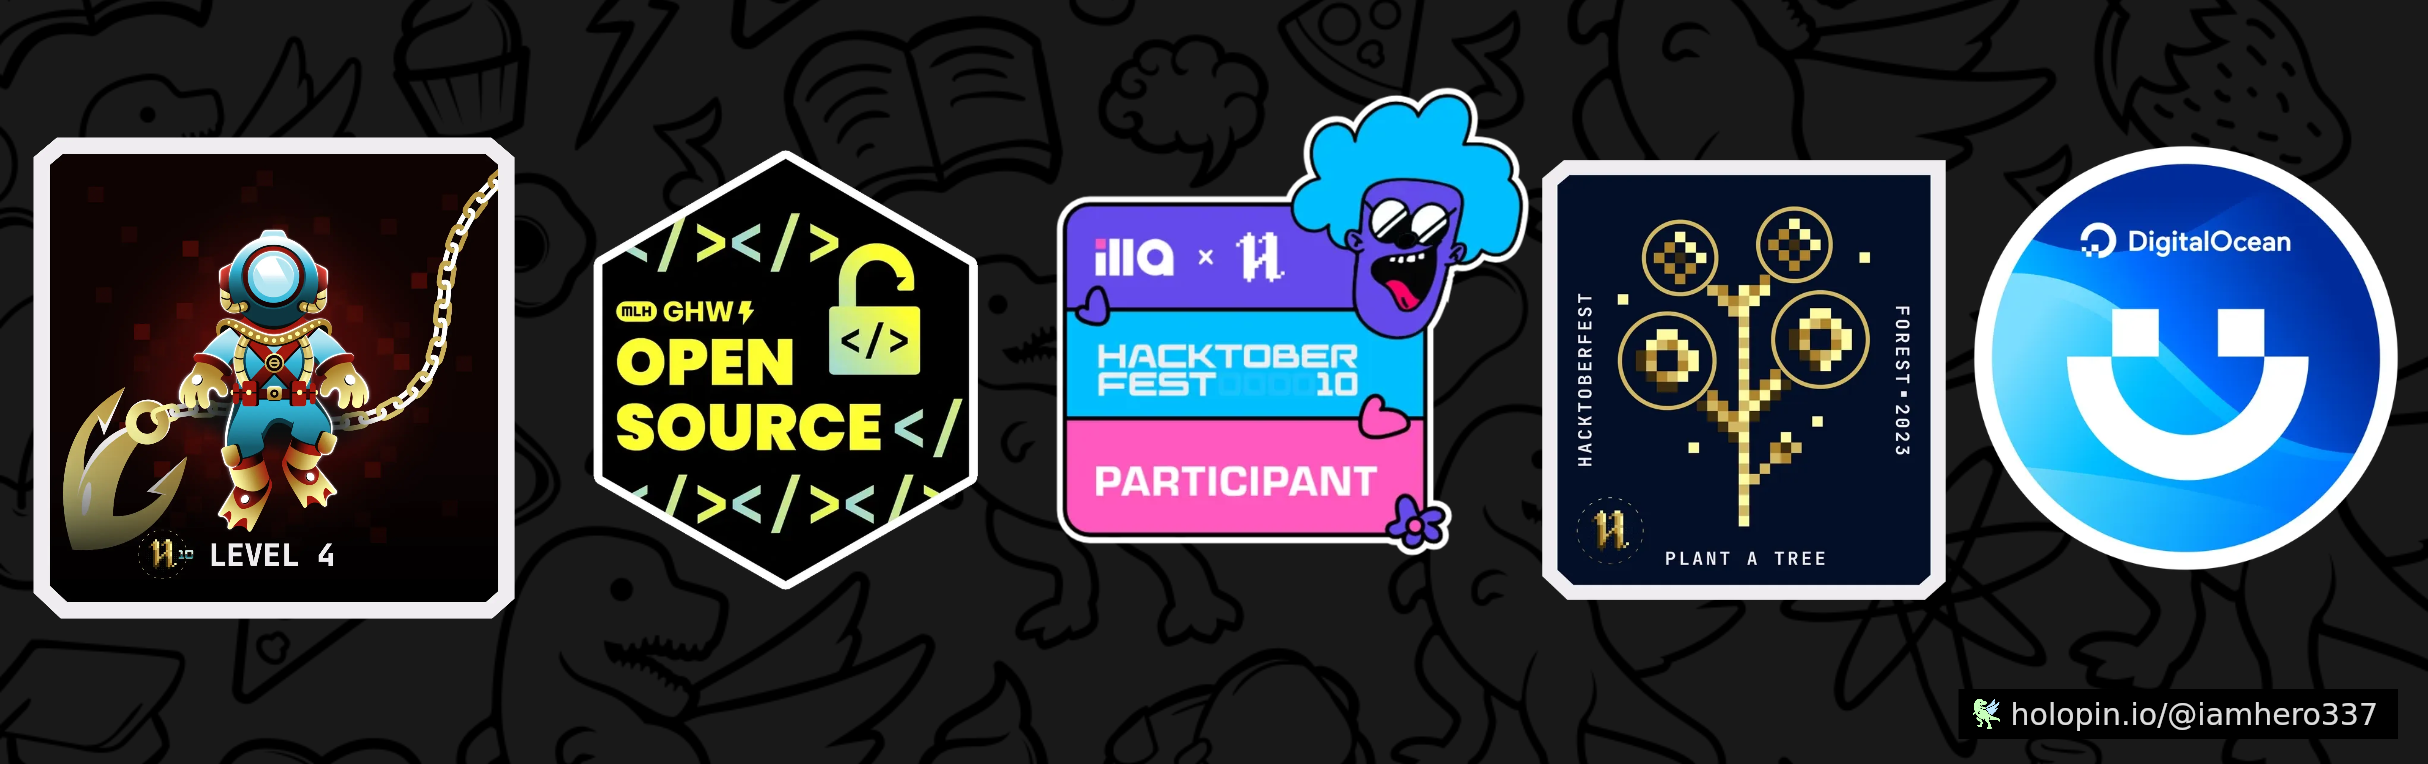 An image of @iamhero337's Holopin badges, which is a link to view their full Holopin profile